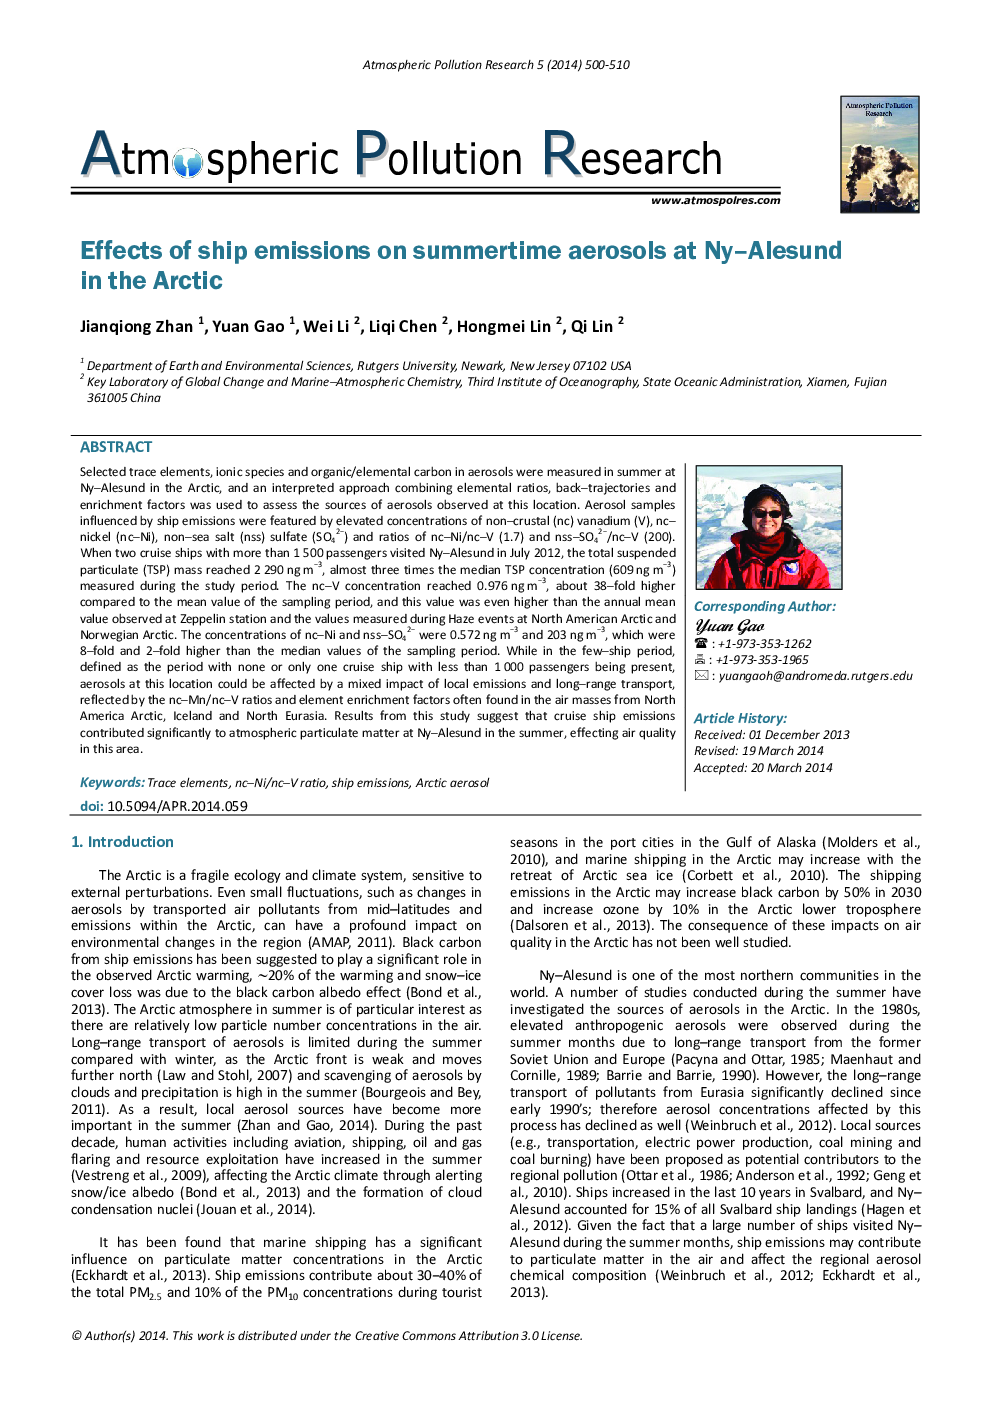 Effects of ship emissions on summertime aerosols at Ny–Alesund in the Arctic